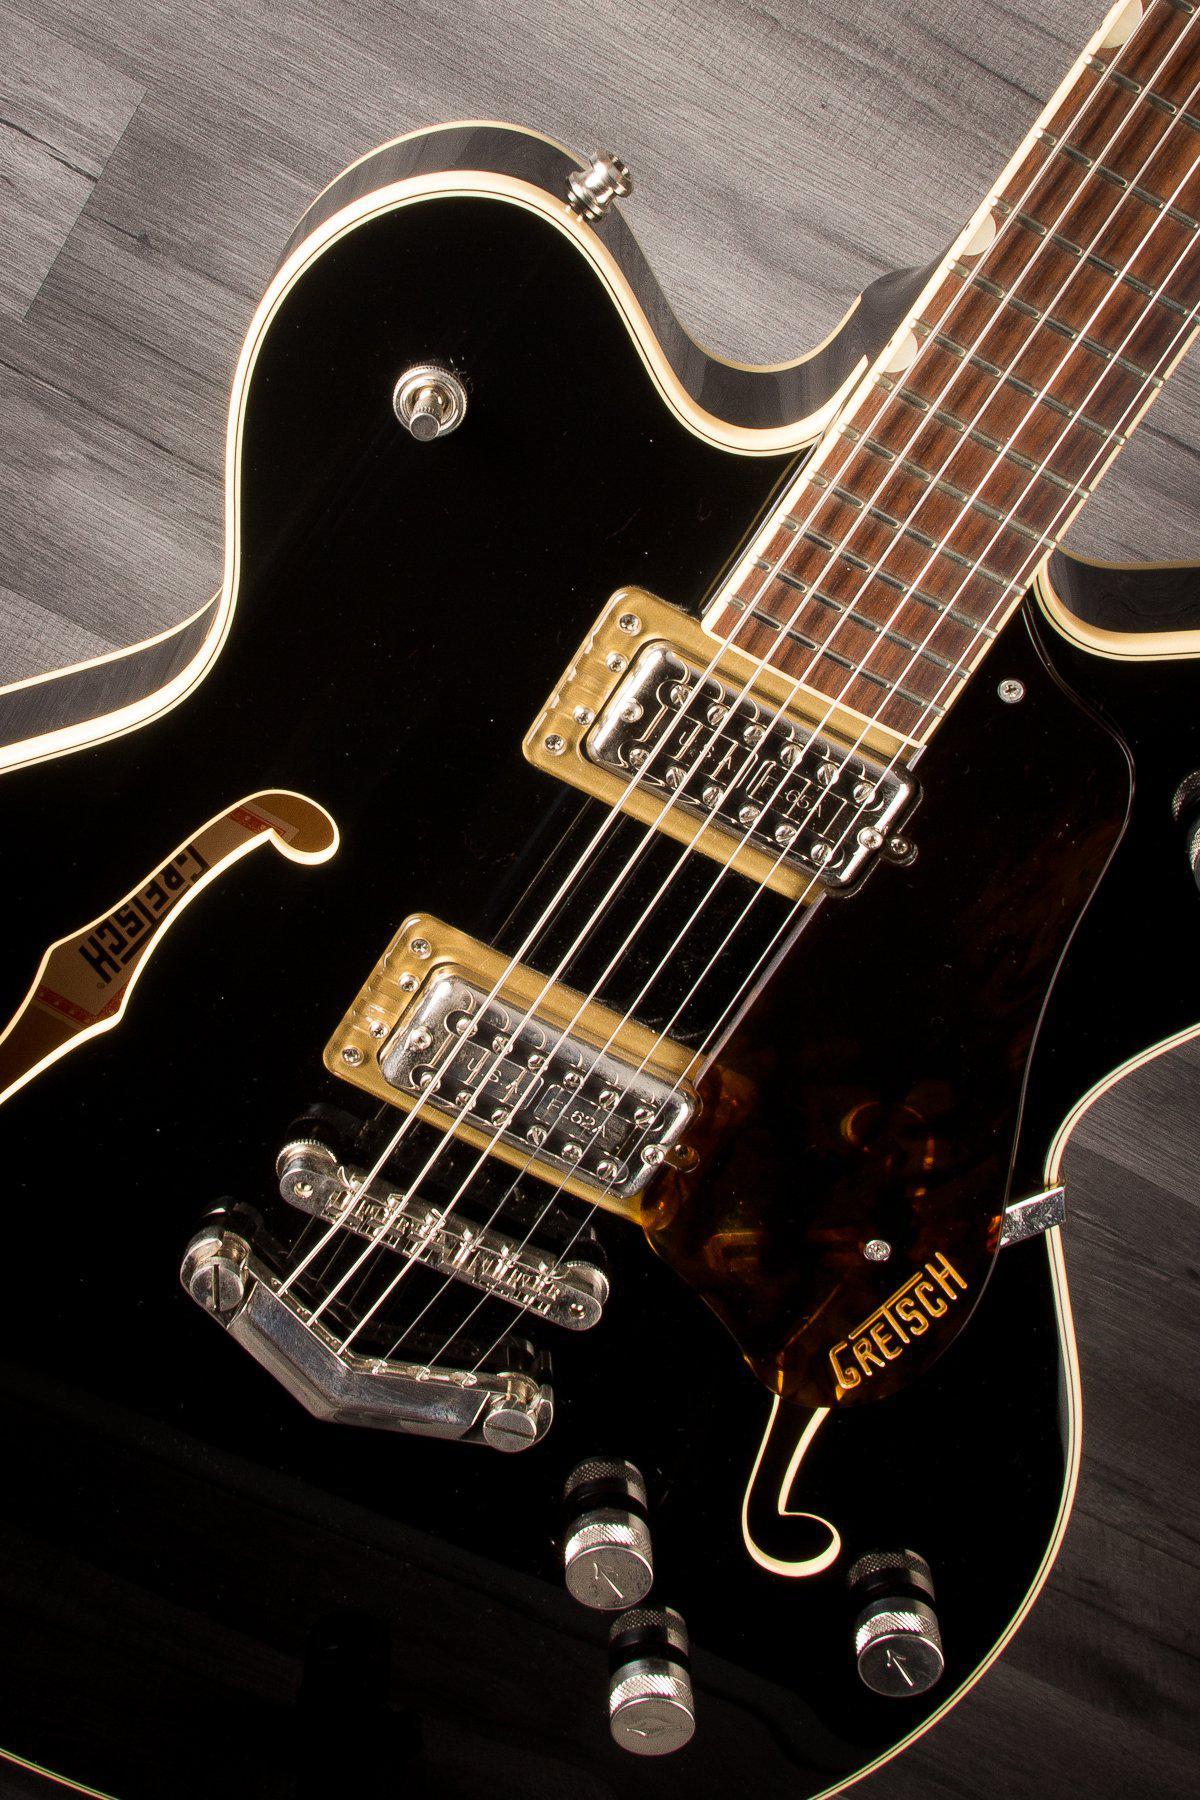 Gretsch Players Edition 6609 Broadkaster